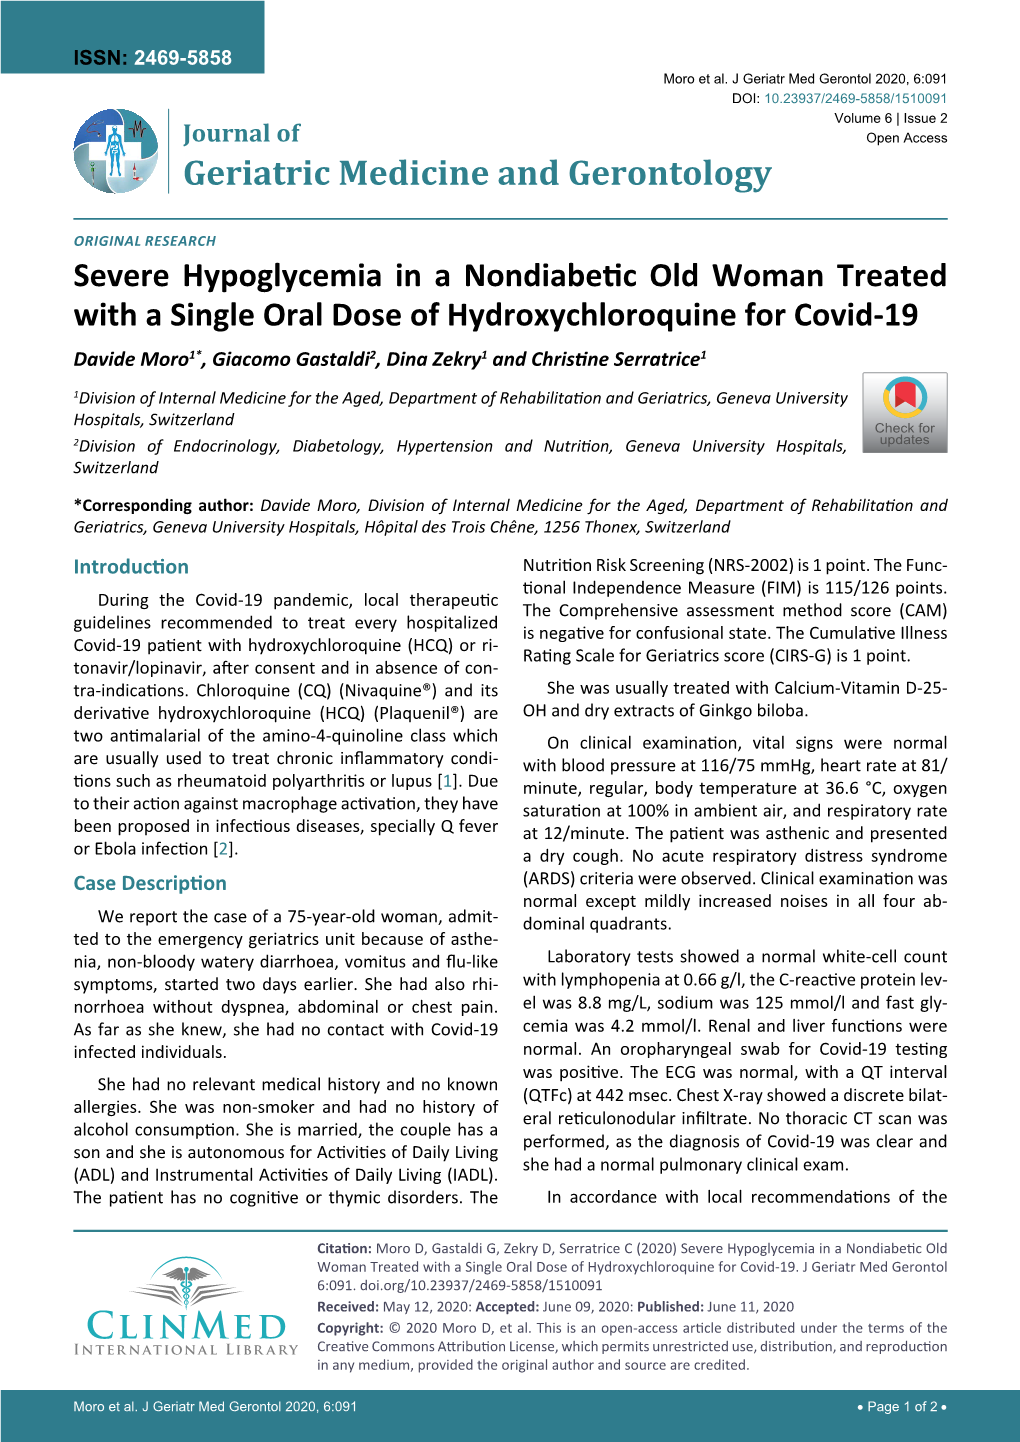 Severe Hypoglycemia in a Nondiabetic Old Woman Treated